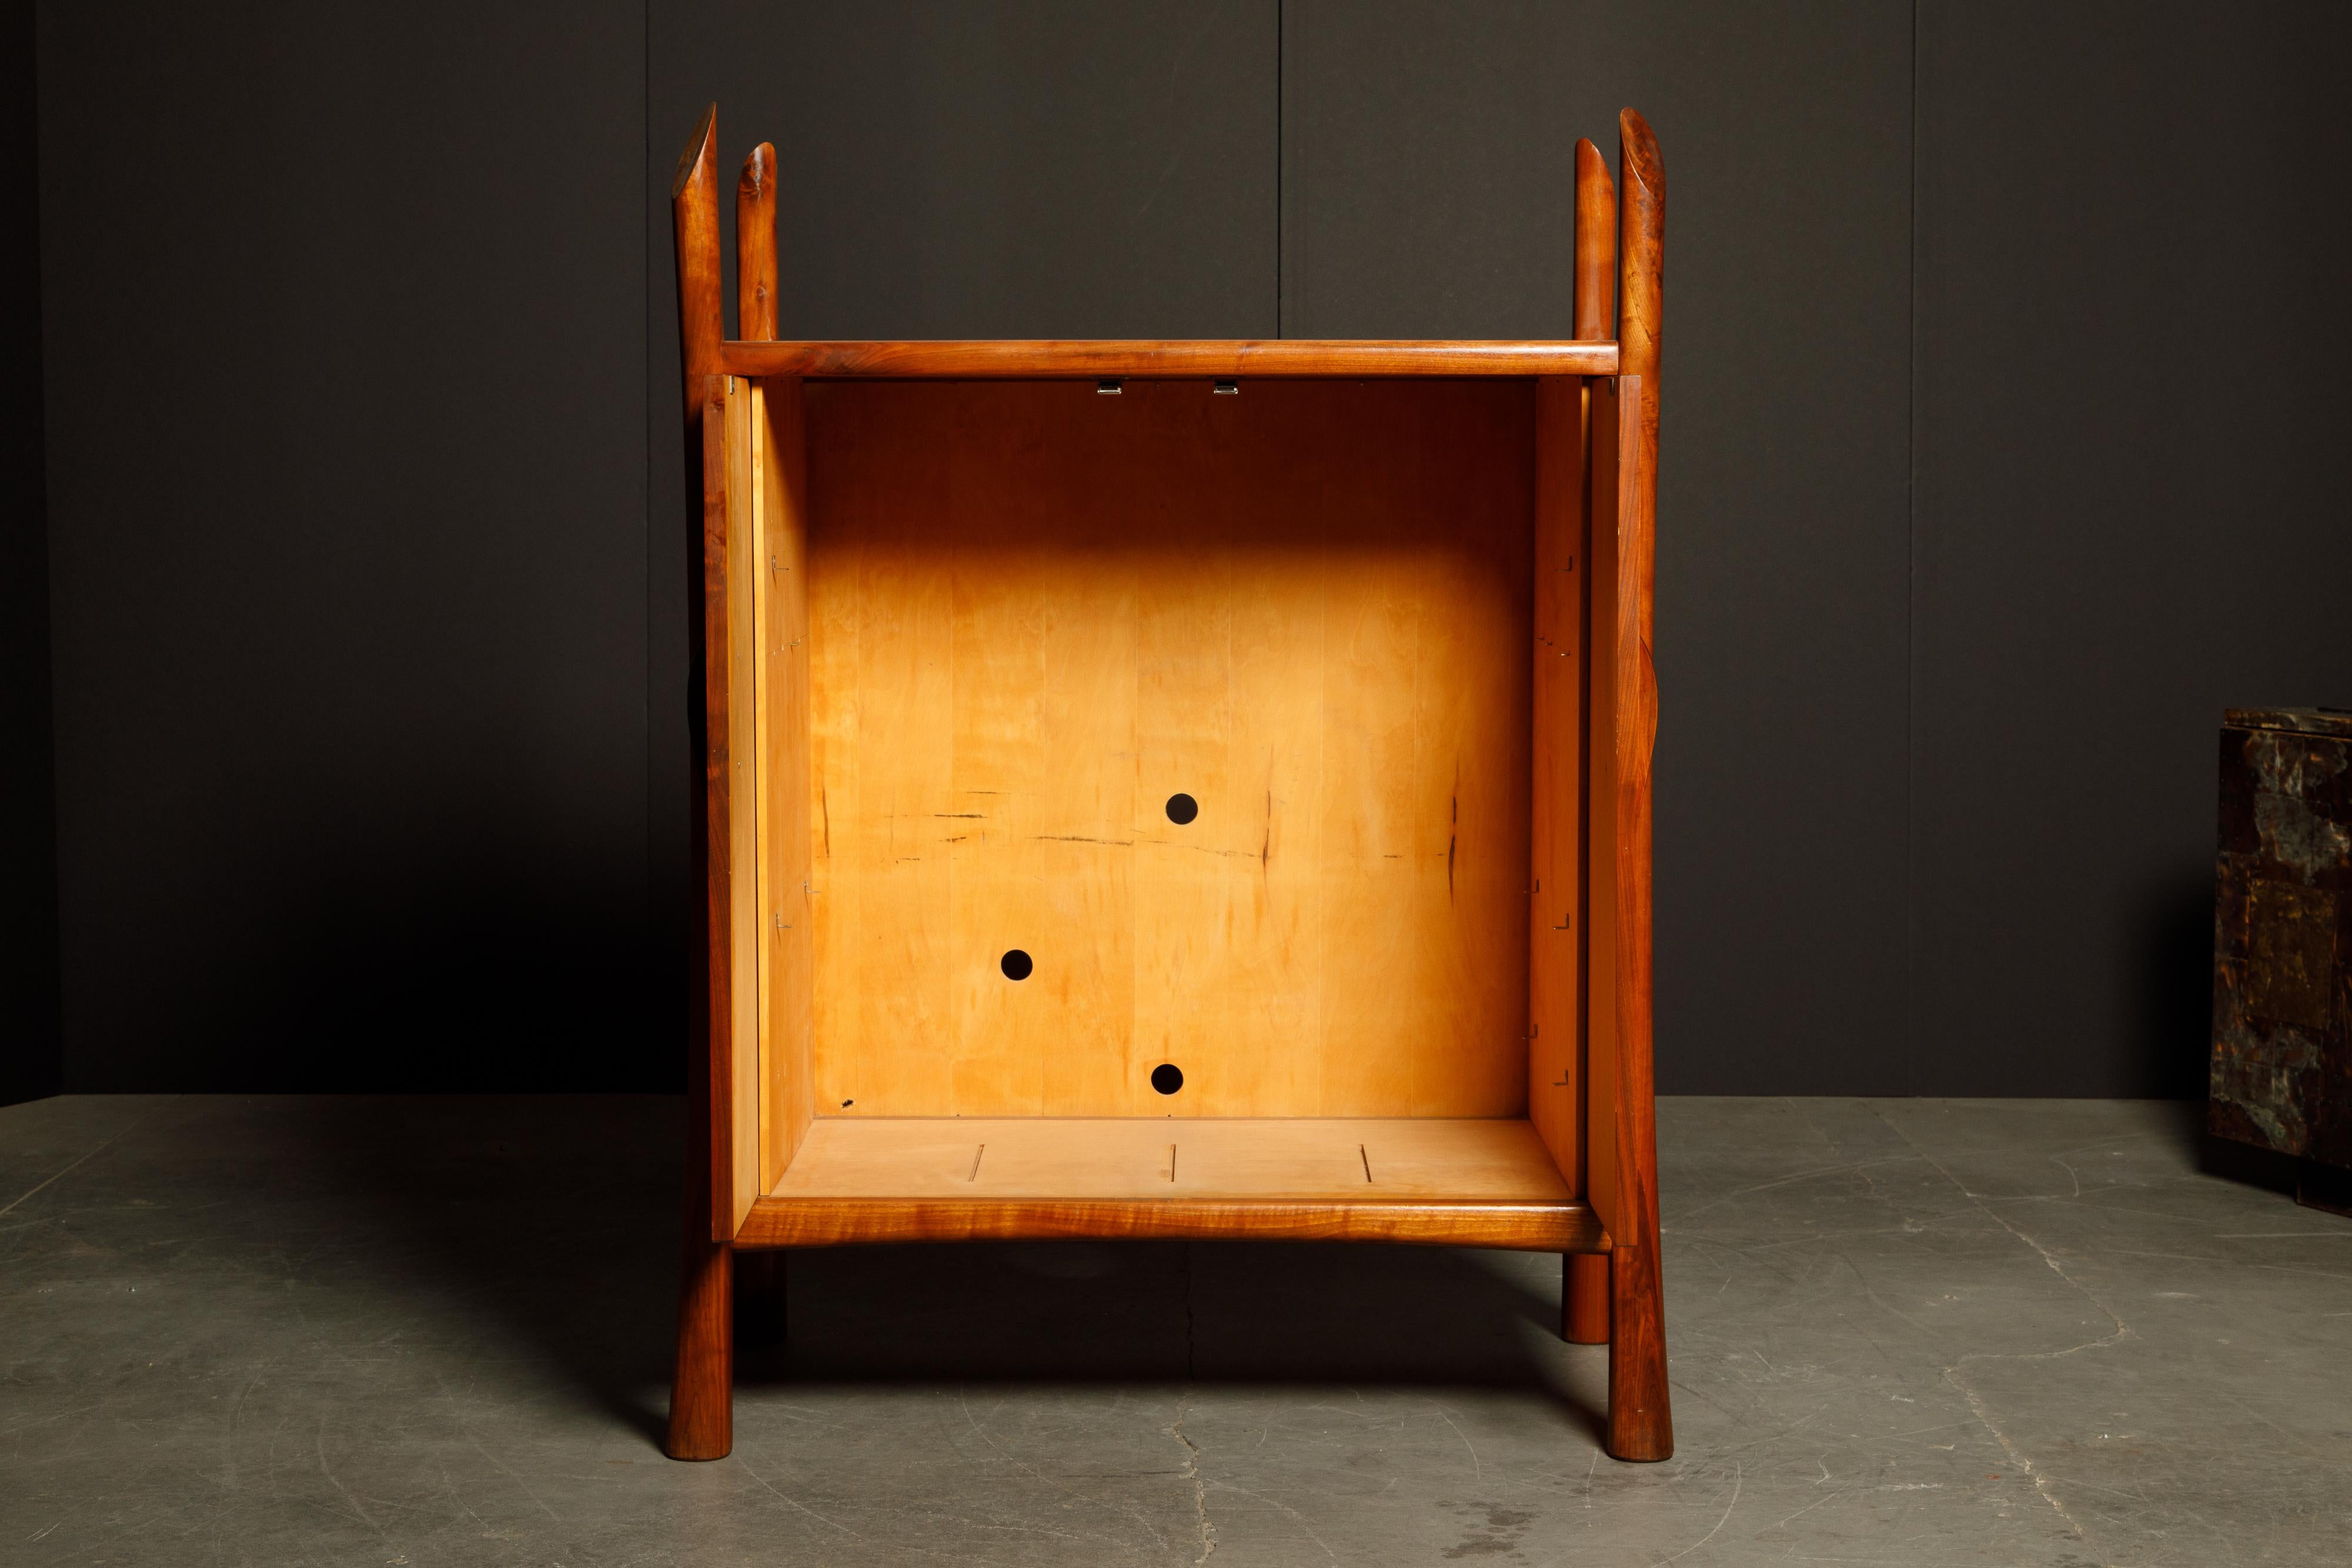 Robert Whitley Sculptural Walnut Studio Craftsman Cabinet, New Hope PA, 1970s For Sale 10